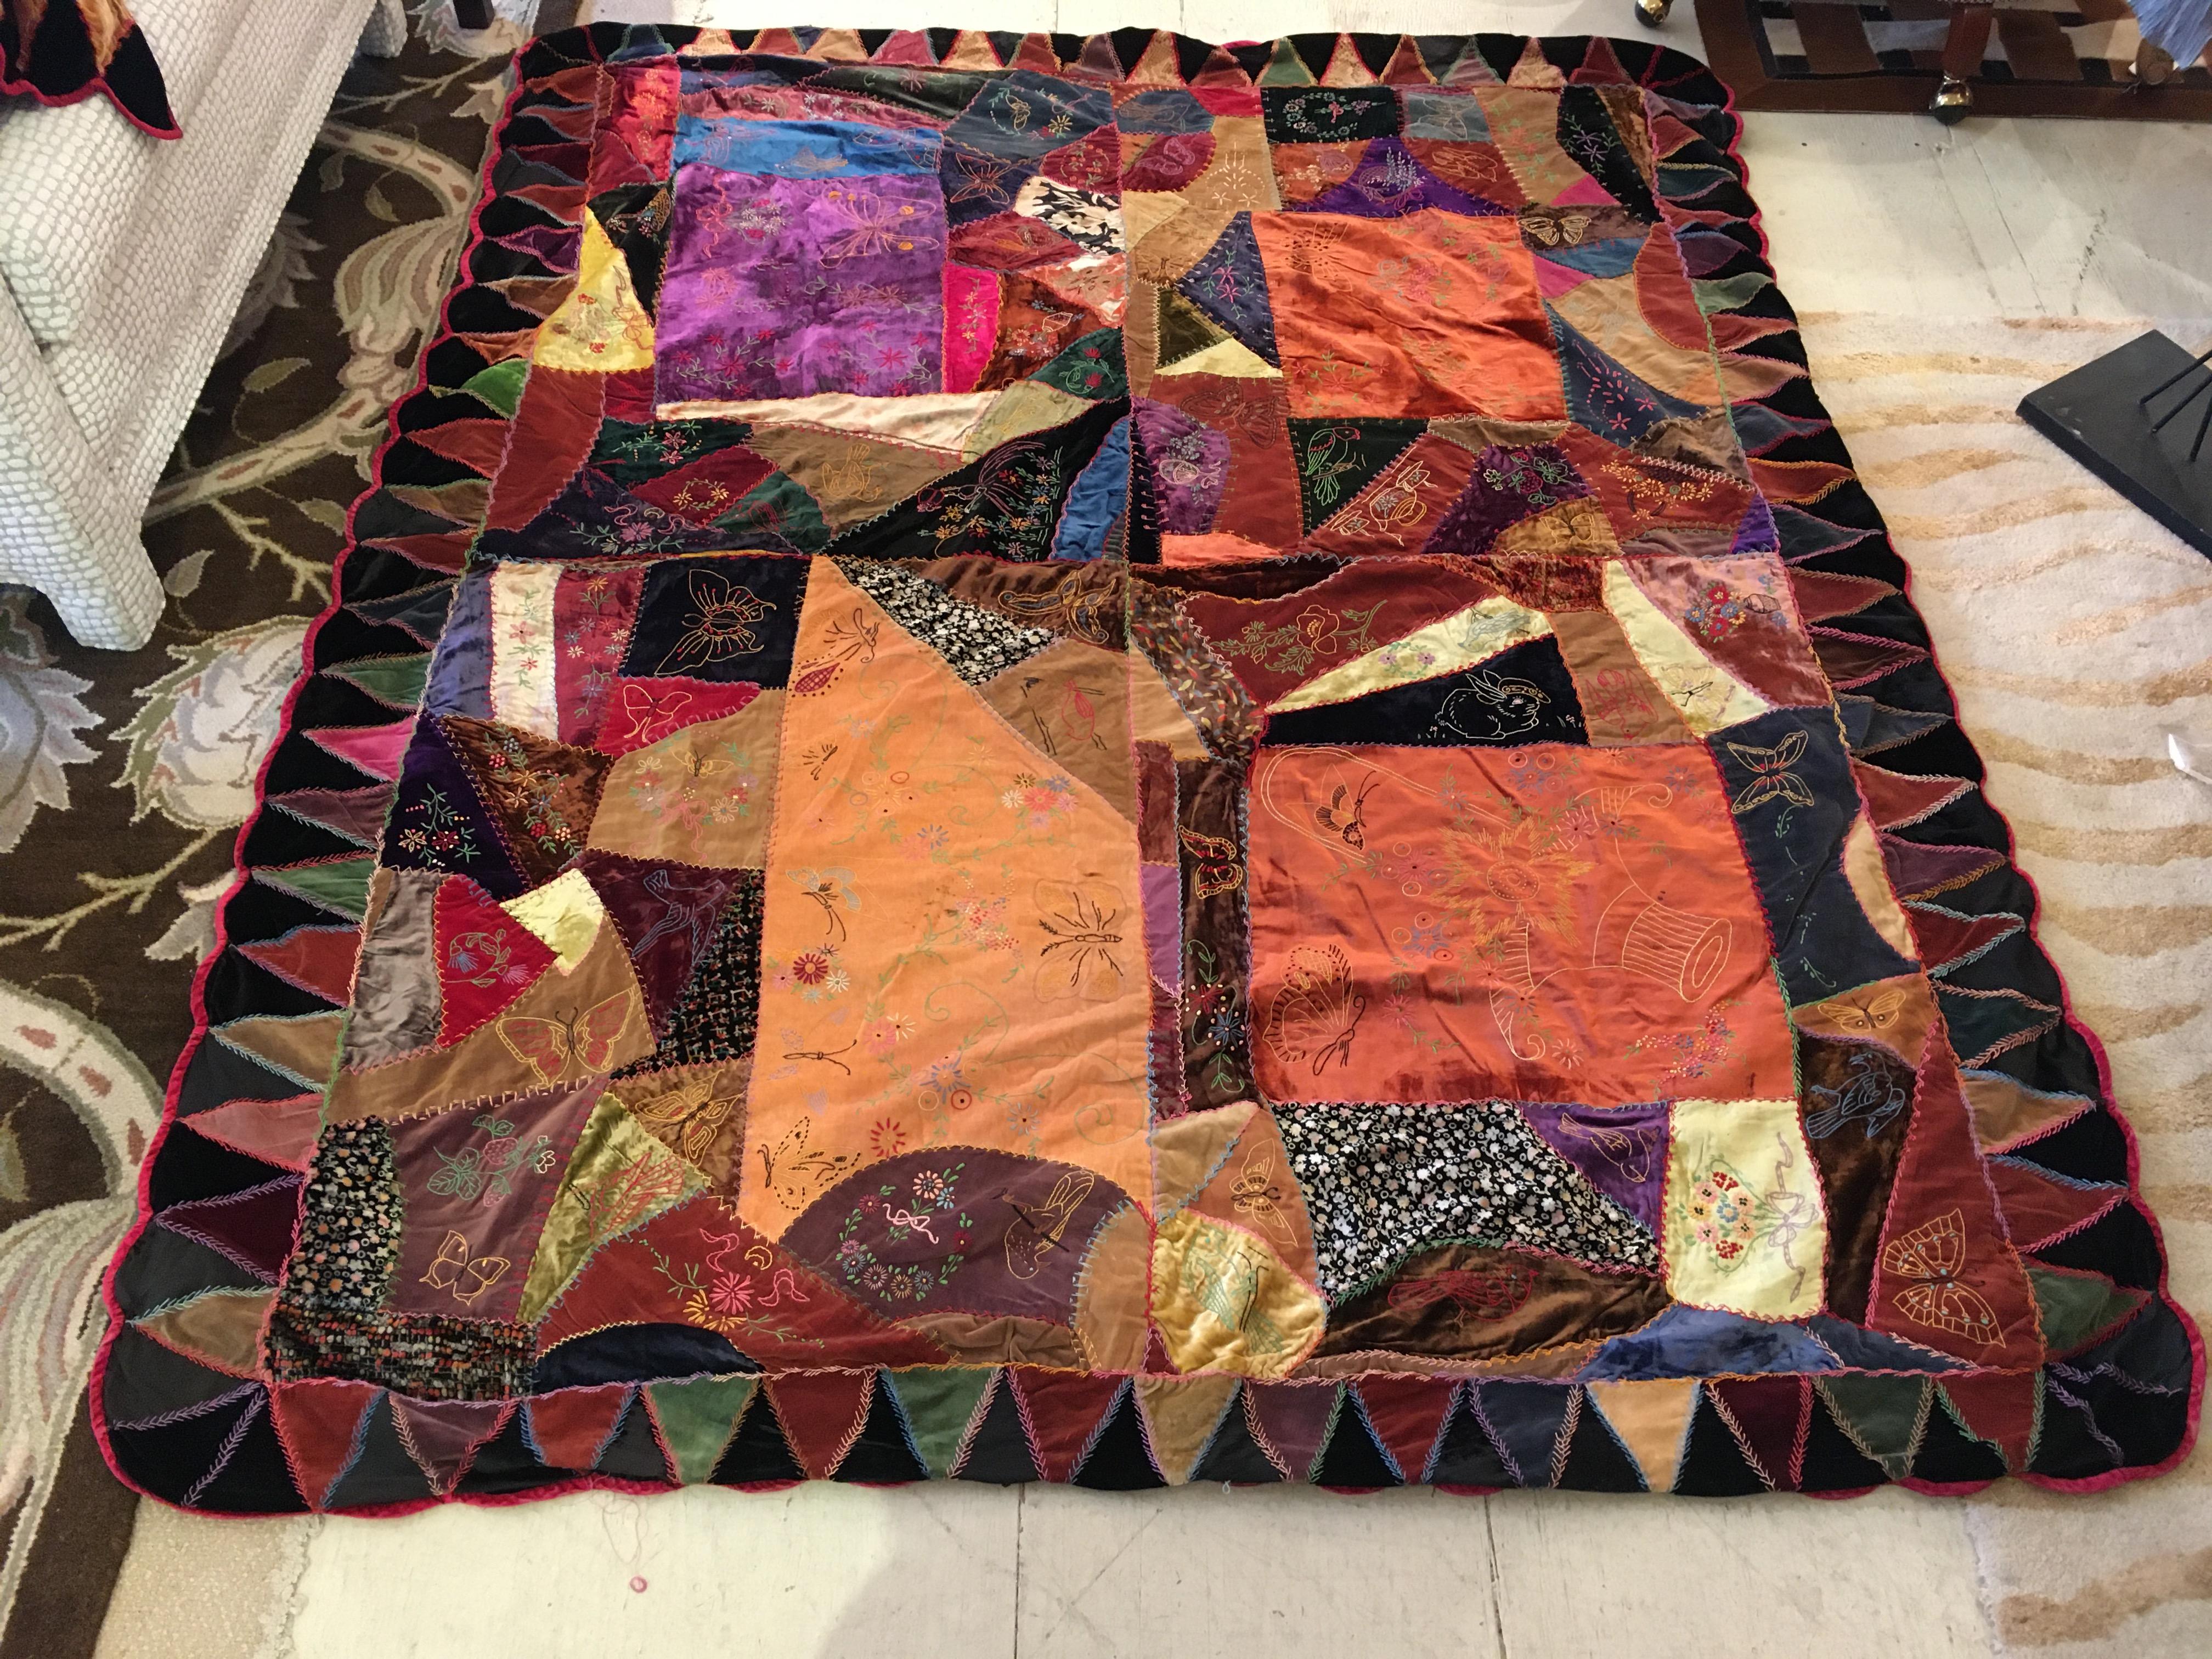 North American Richly Patterned Antique Crazy Quilt and Two Pillows For Sale